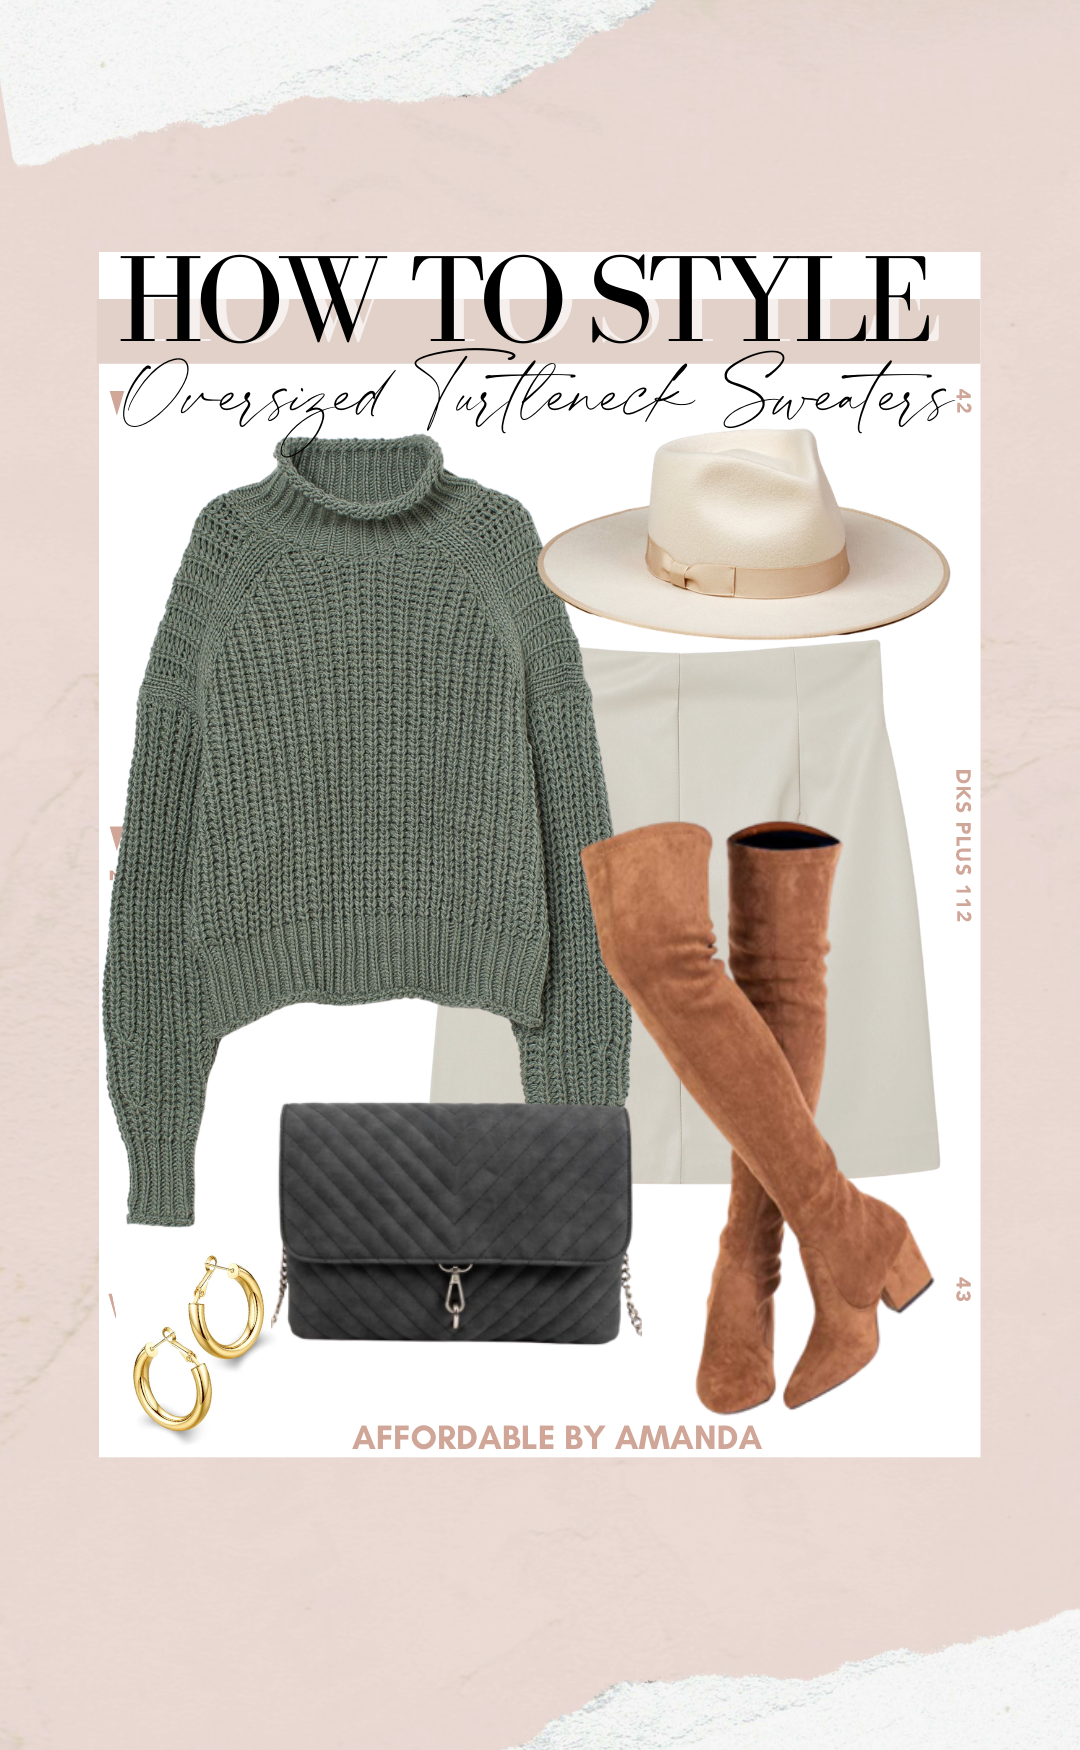 Style an Oversized Turtleneck Sweater | Affordable by Amanda, Tampa style blogger